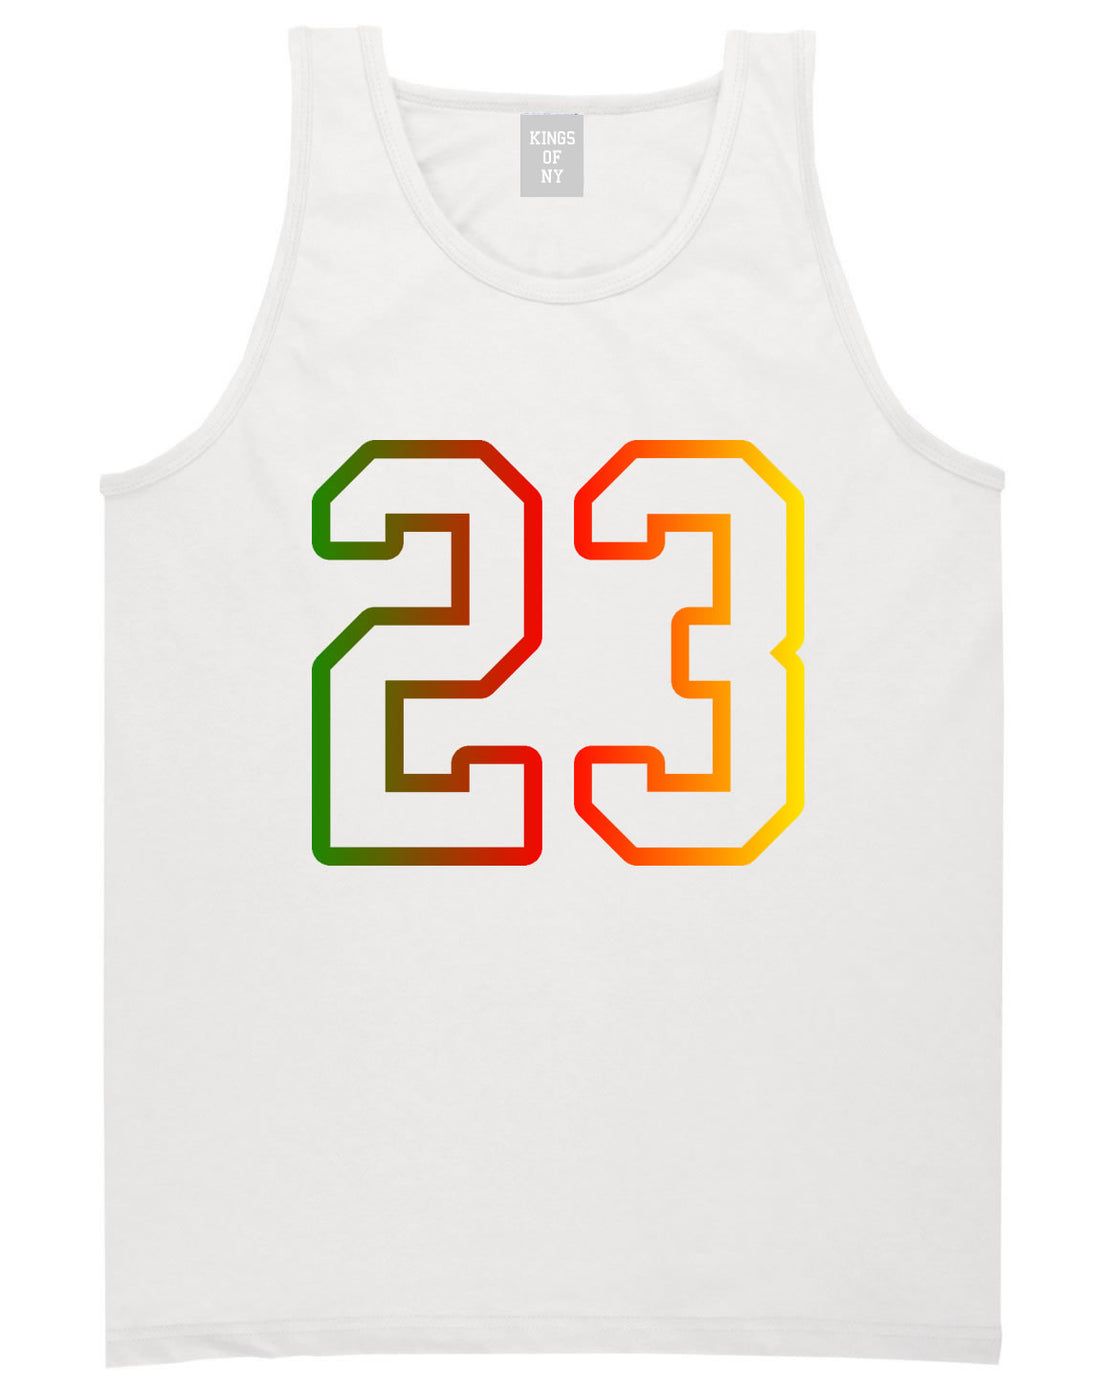 23 Cement Print Colorful Jersey Tank Top in White By Kings Of NY